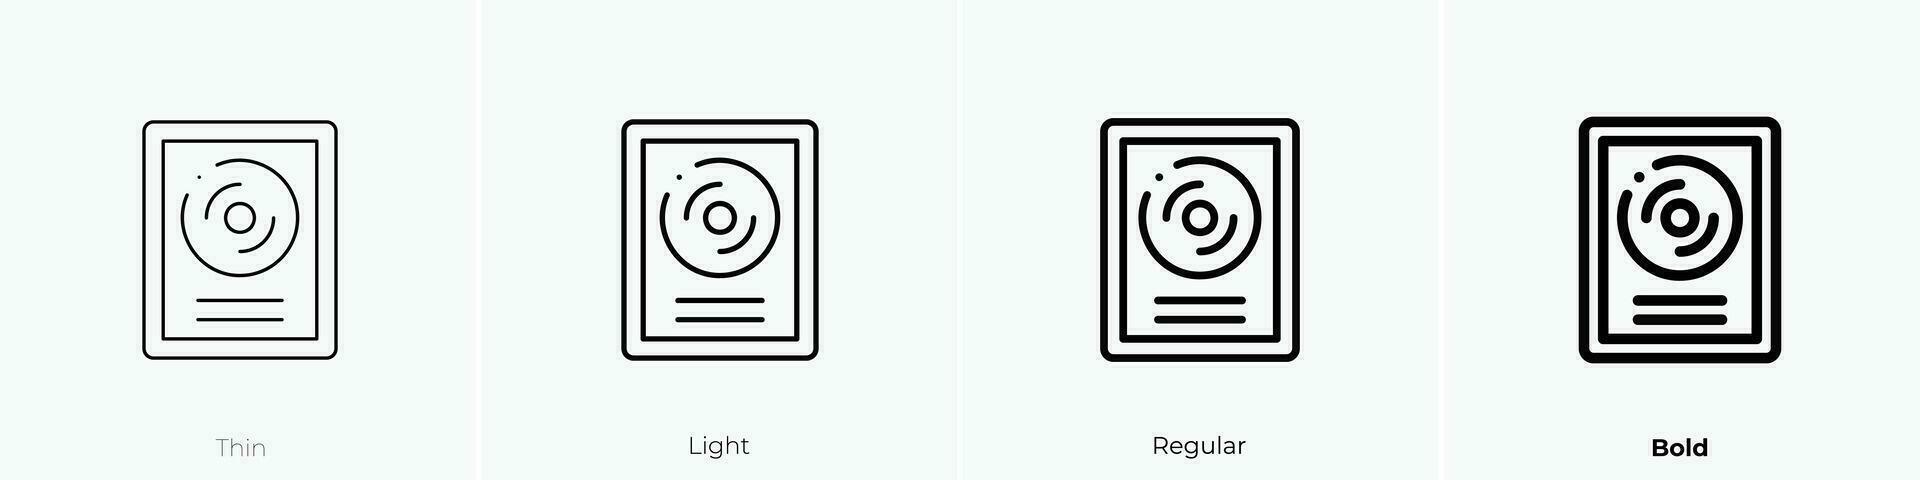 platinum icon. Thin, Light, Regular And Bold style design isolated on white background vector